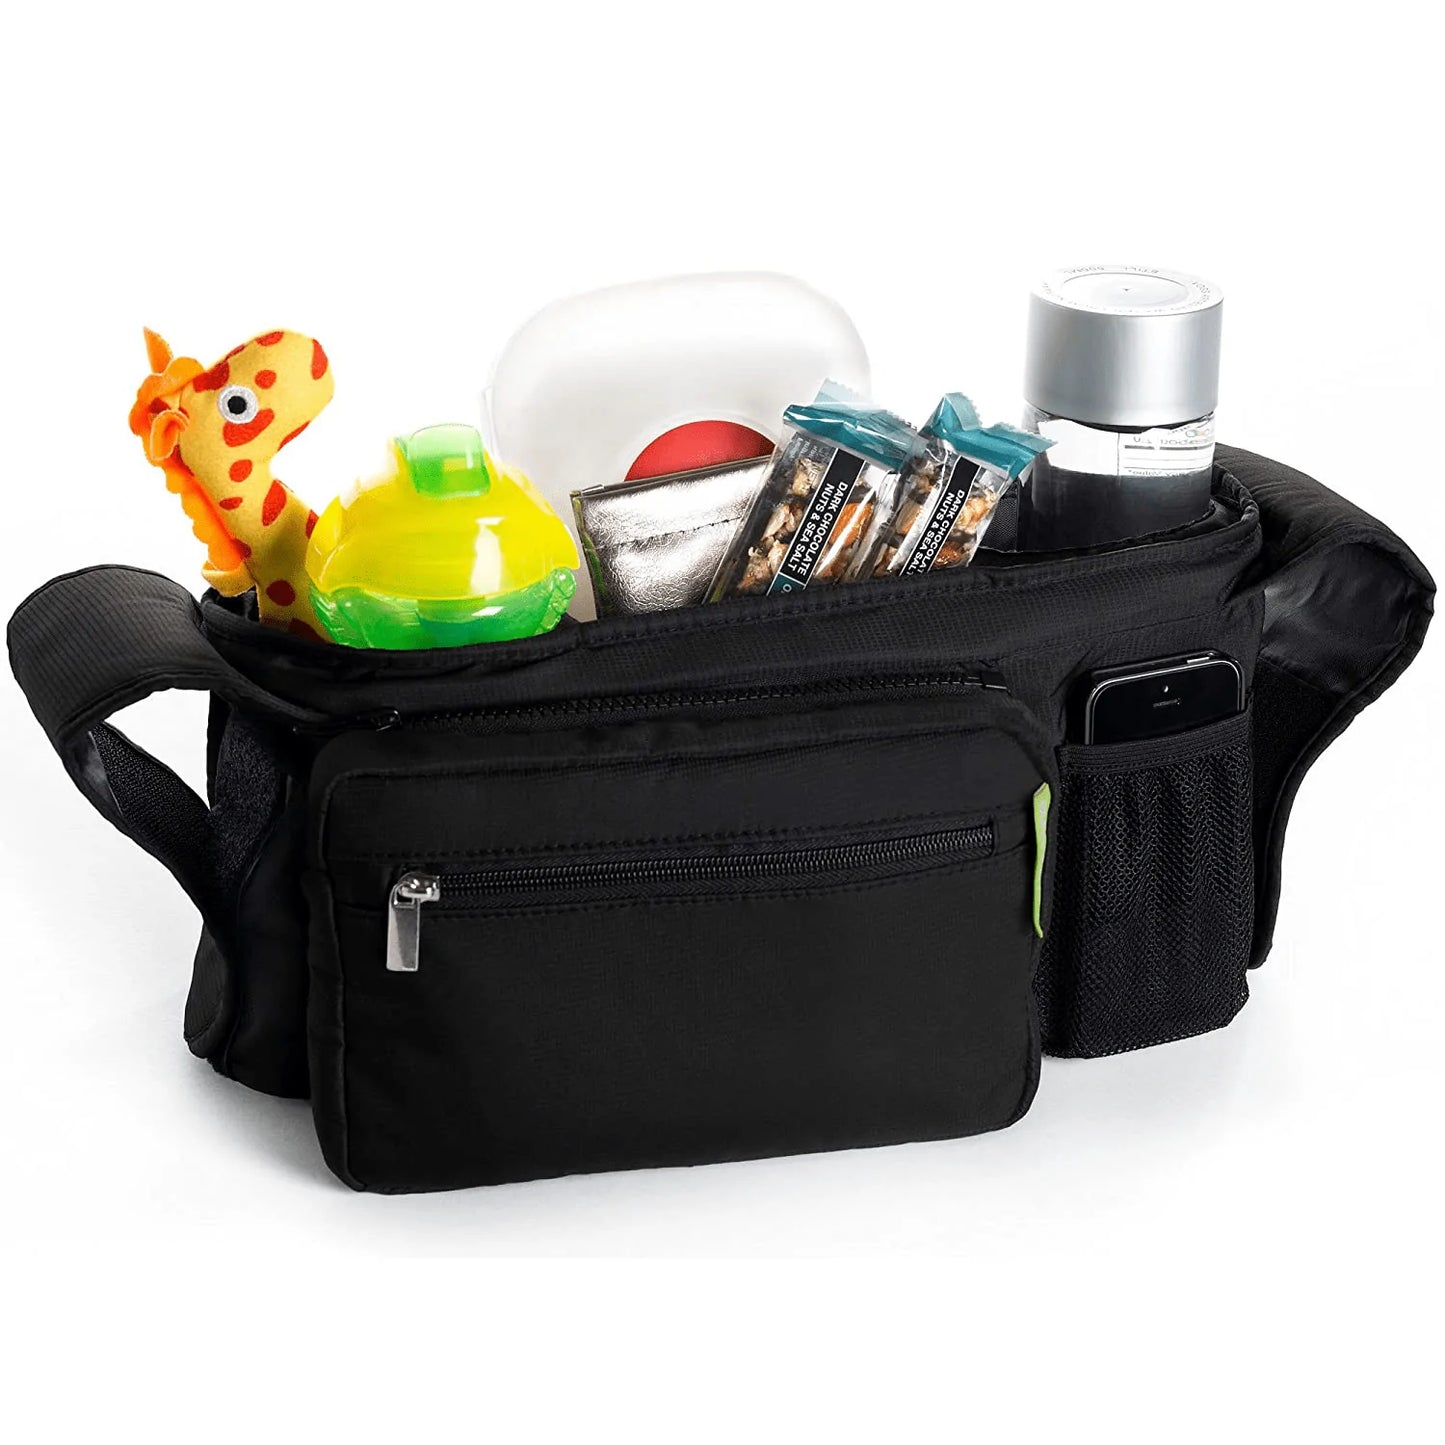 Ethan & Emma Universal Baby Stroller Organizer with Insulated Cup Holders for Smart Moms. Diaper Storage, Secure Straps, Detachable Bag, Pockets for Phone, Keys, Toys. Compact Design Fit All Strollers Animals & Pet Supplies > Pet Supplies > Dog Supplies > Dog Treadmills Ethan & Emma   